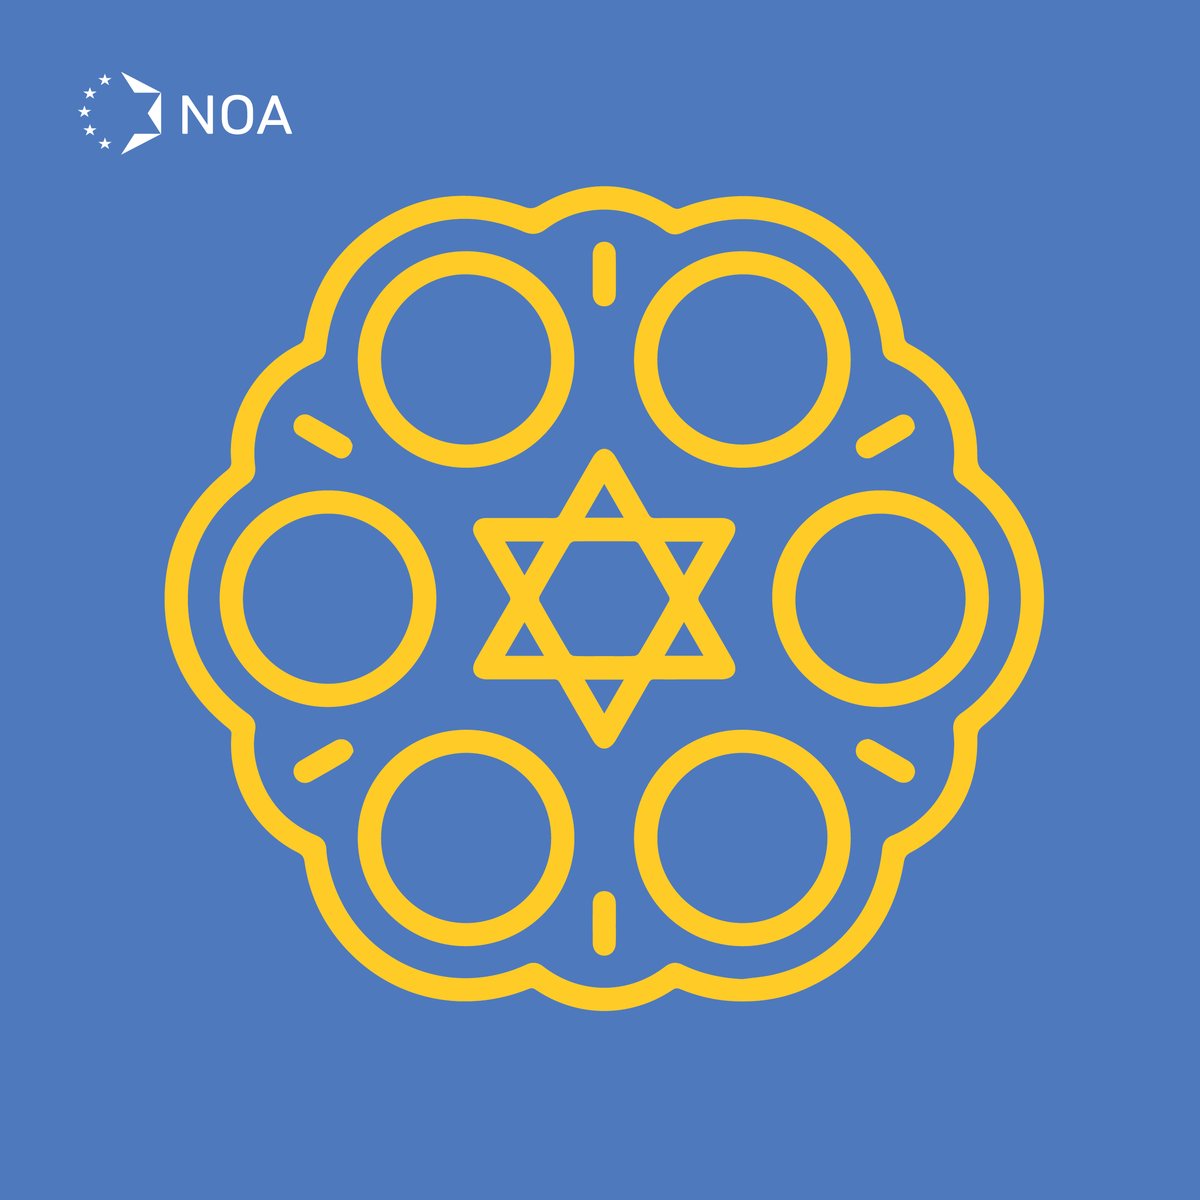 On behalf of all AEPJ members and the NOA Project, we wish #Jewish communities all around the world a happy Passover! ✡️#Pesach #jewishculture #jewishholidays 
👉 noa-project.eu